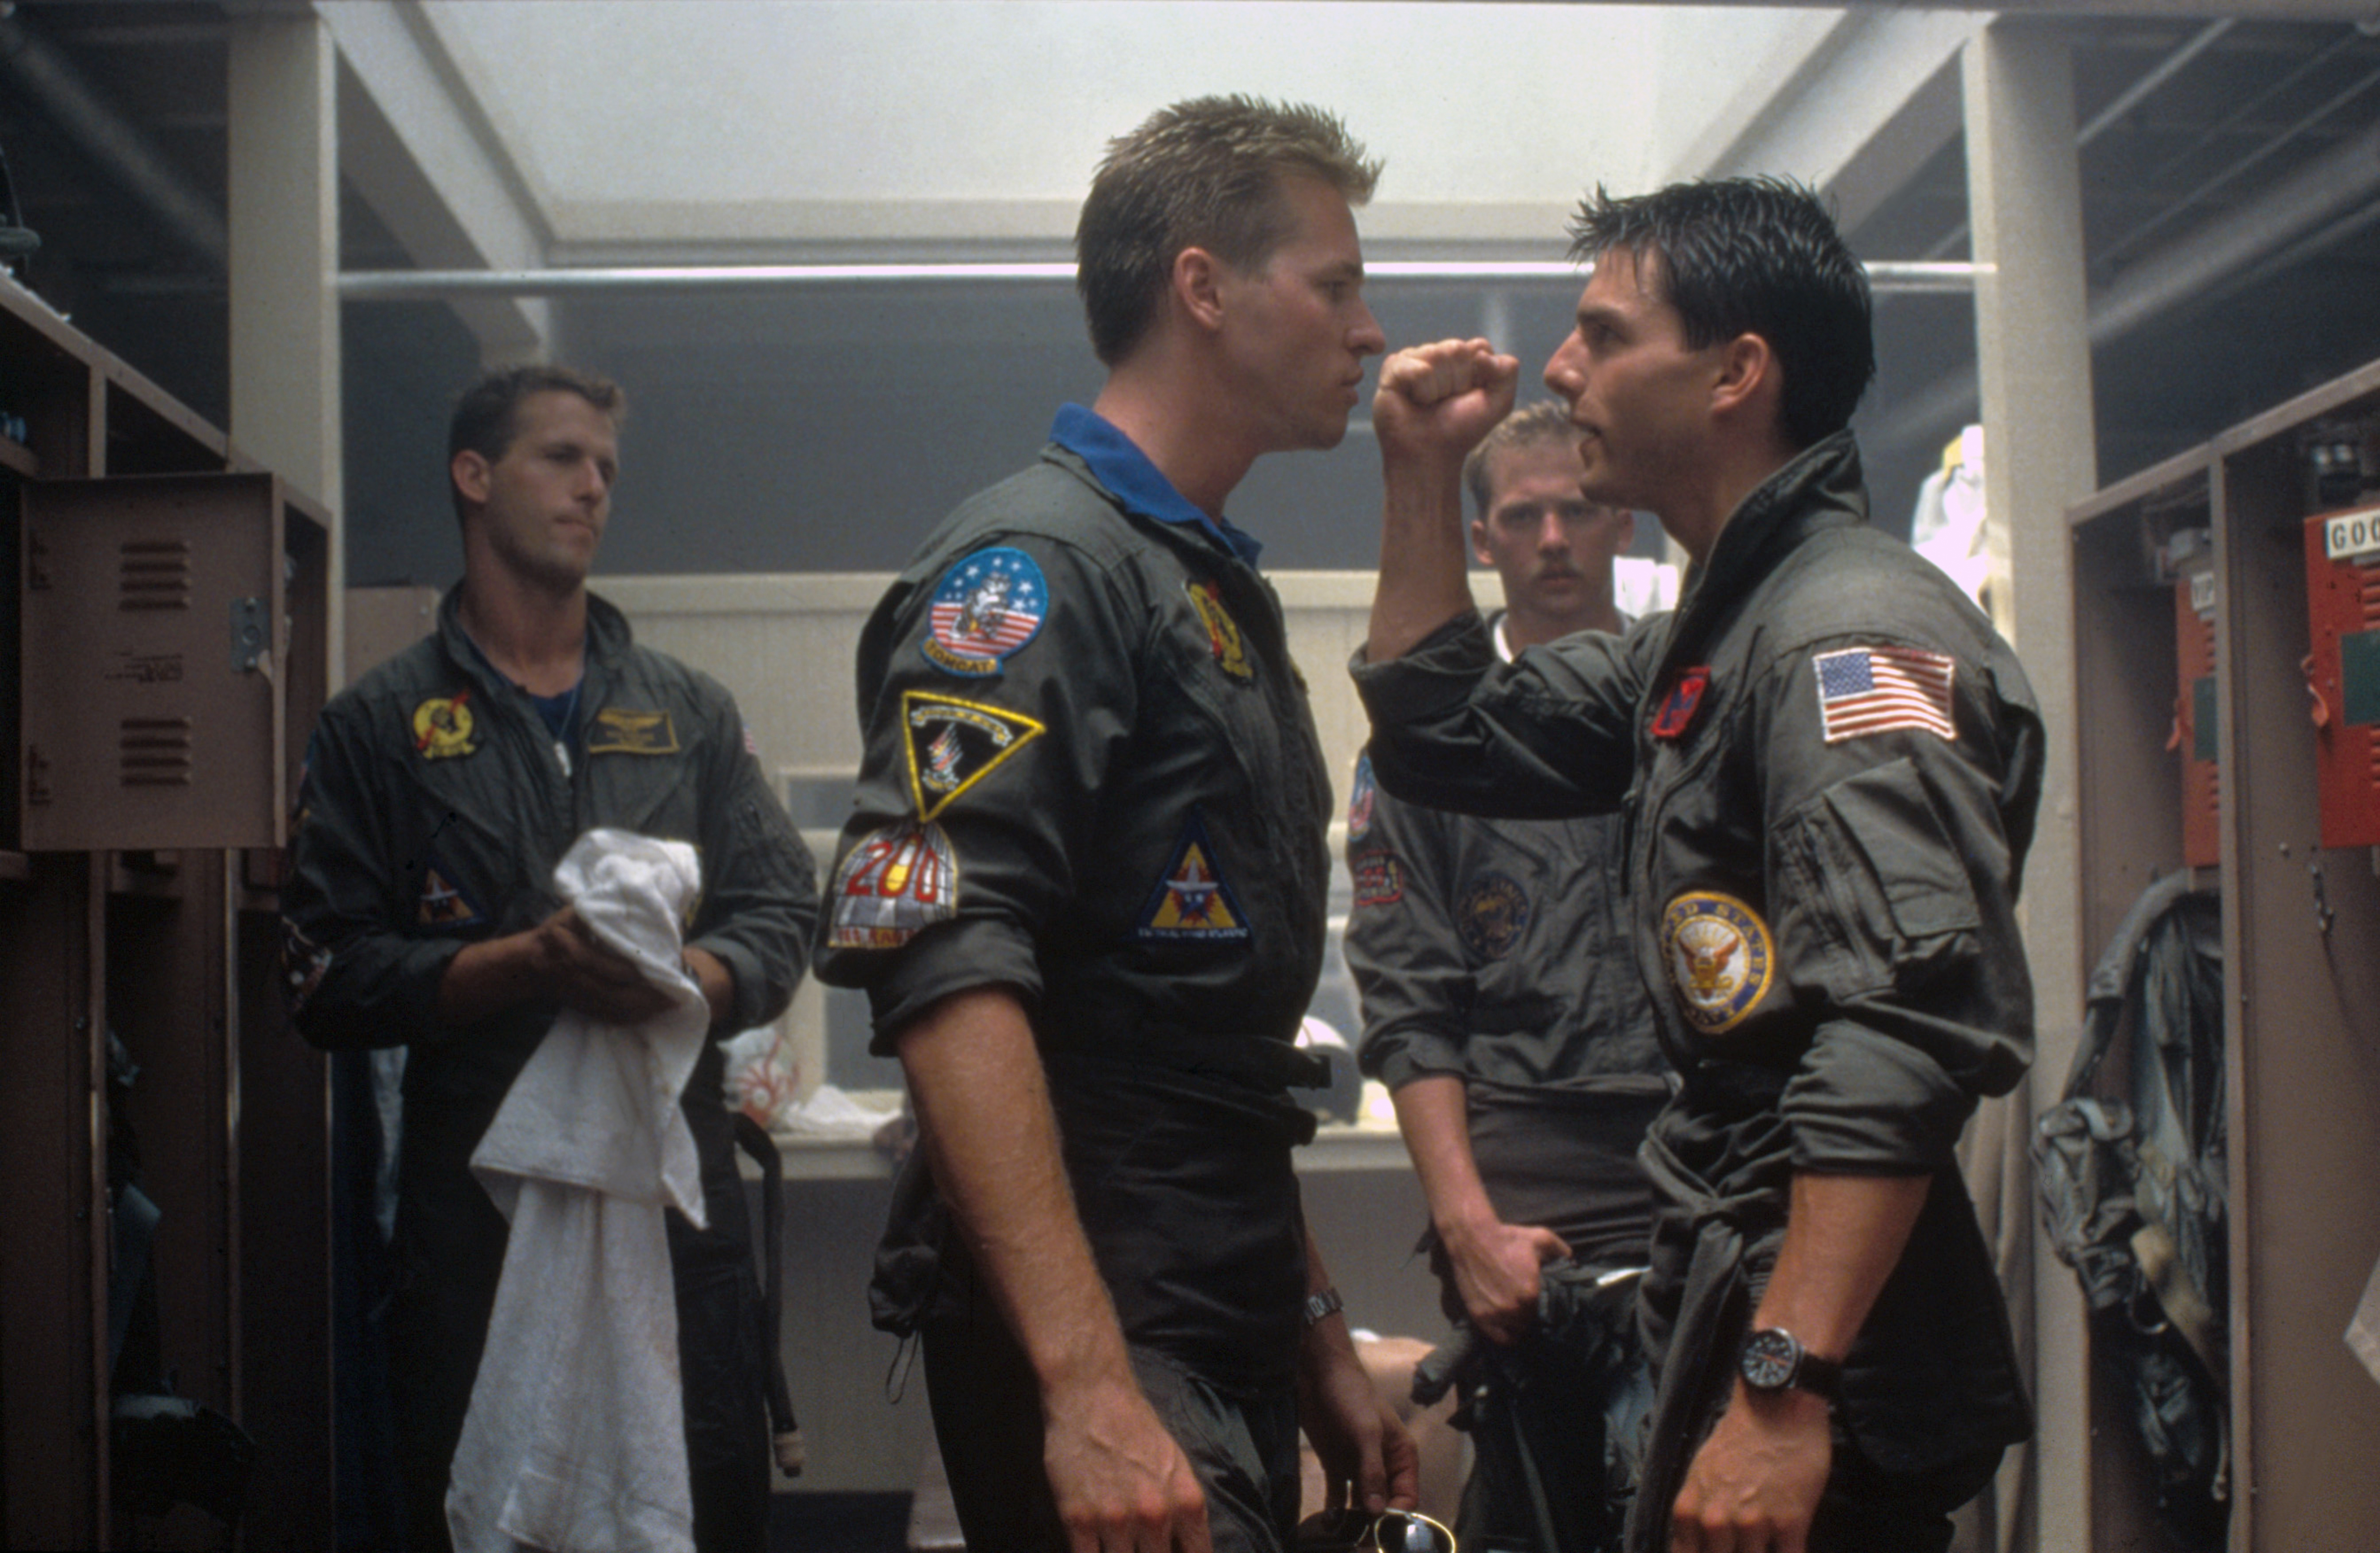 Val Kilmer and Tom Cruise on the set of "Top Gun," directed by Tony Scott, circa 1986. | Source: Getty Images